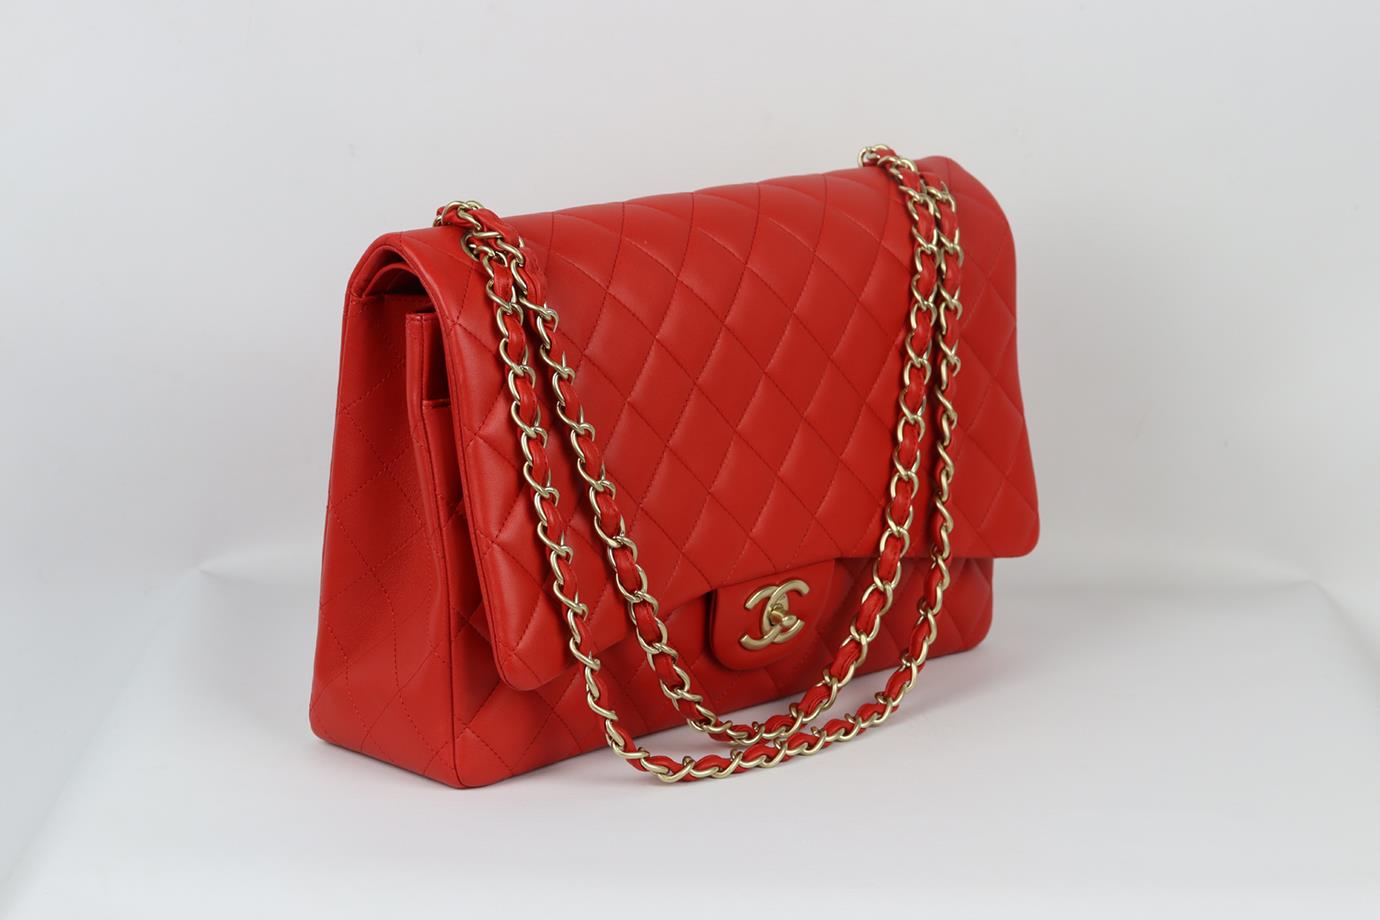 CHANEL 2012 MAXI CLASSIC QUILTED LEATHER DOUBLE FLAP SHOULDER BAG